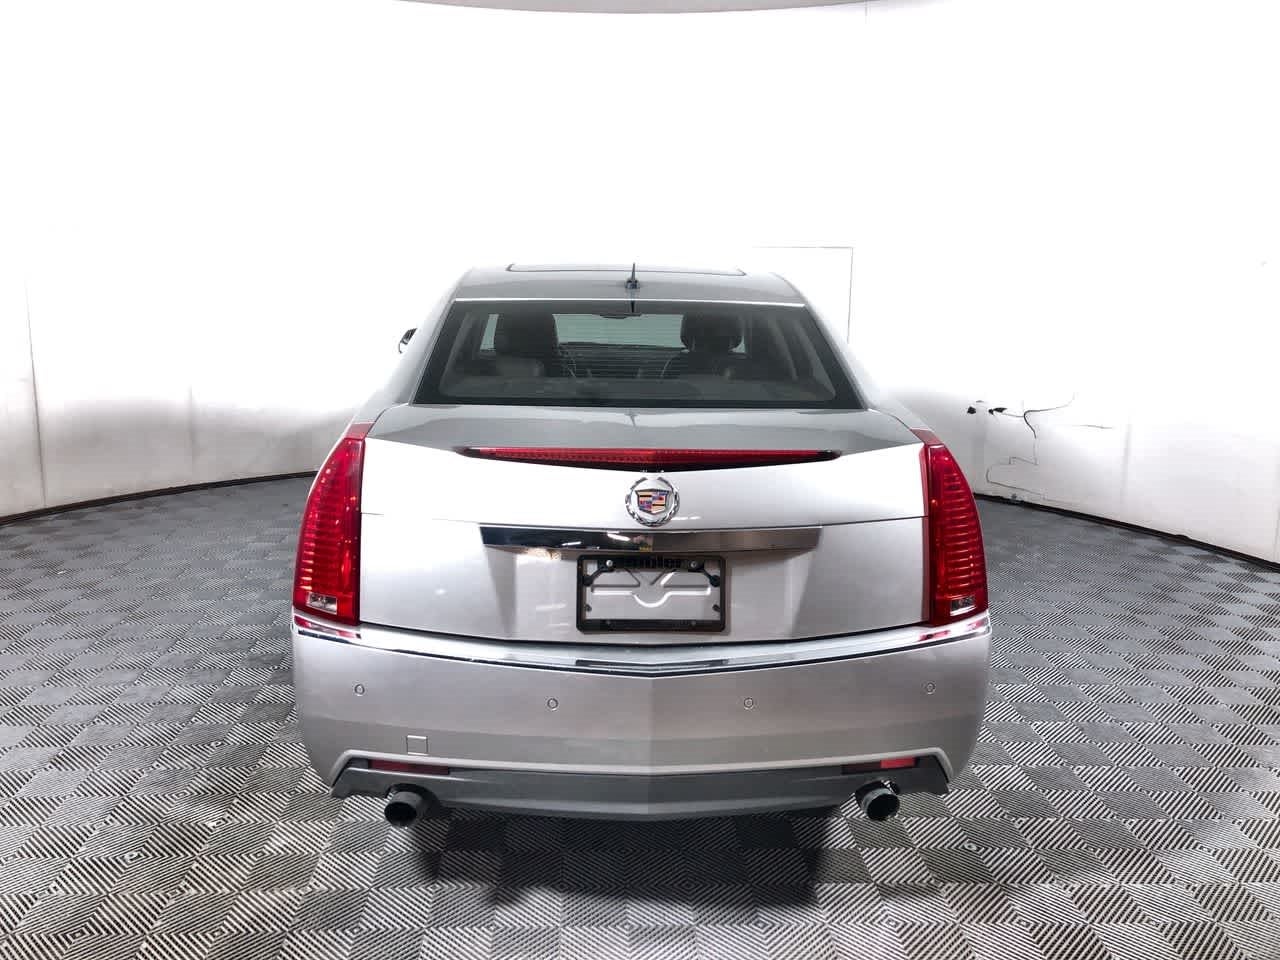 Used 2008 Cadillac CTS 3.6 with VIN 1G6DM577480108688 for sale in Greenwood, IN